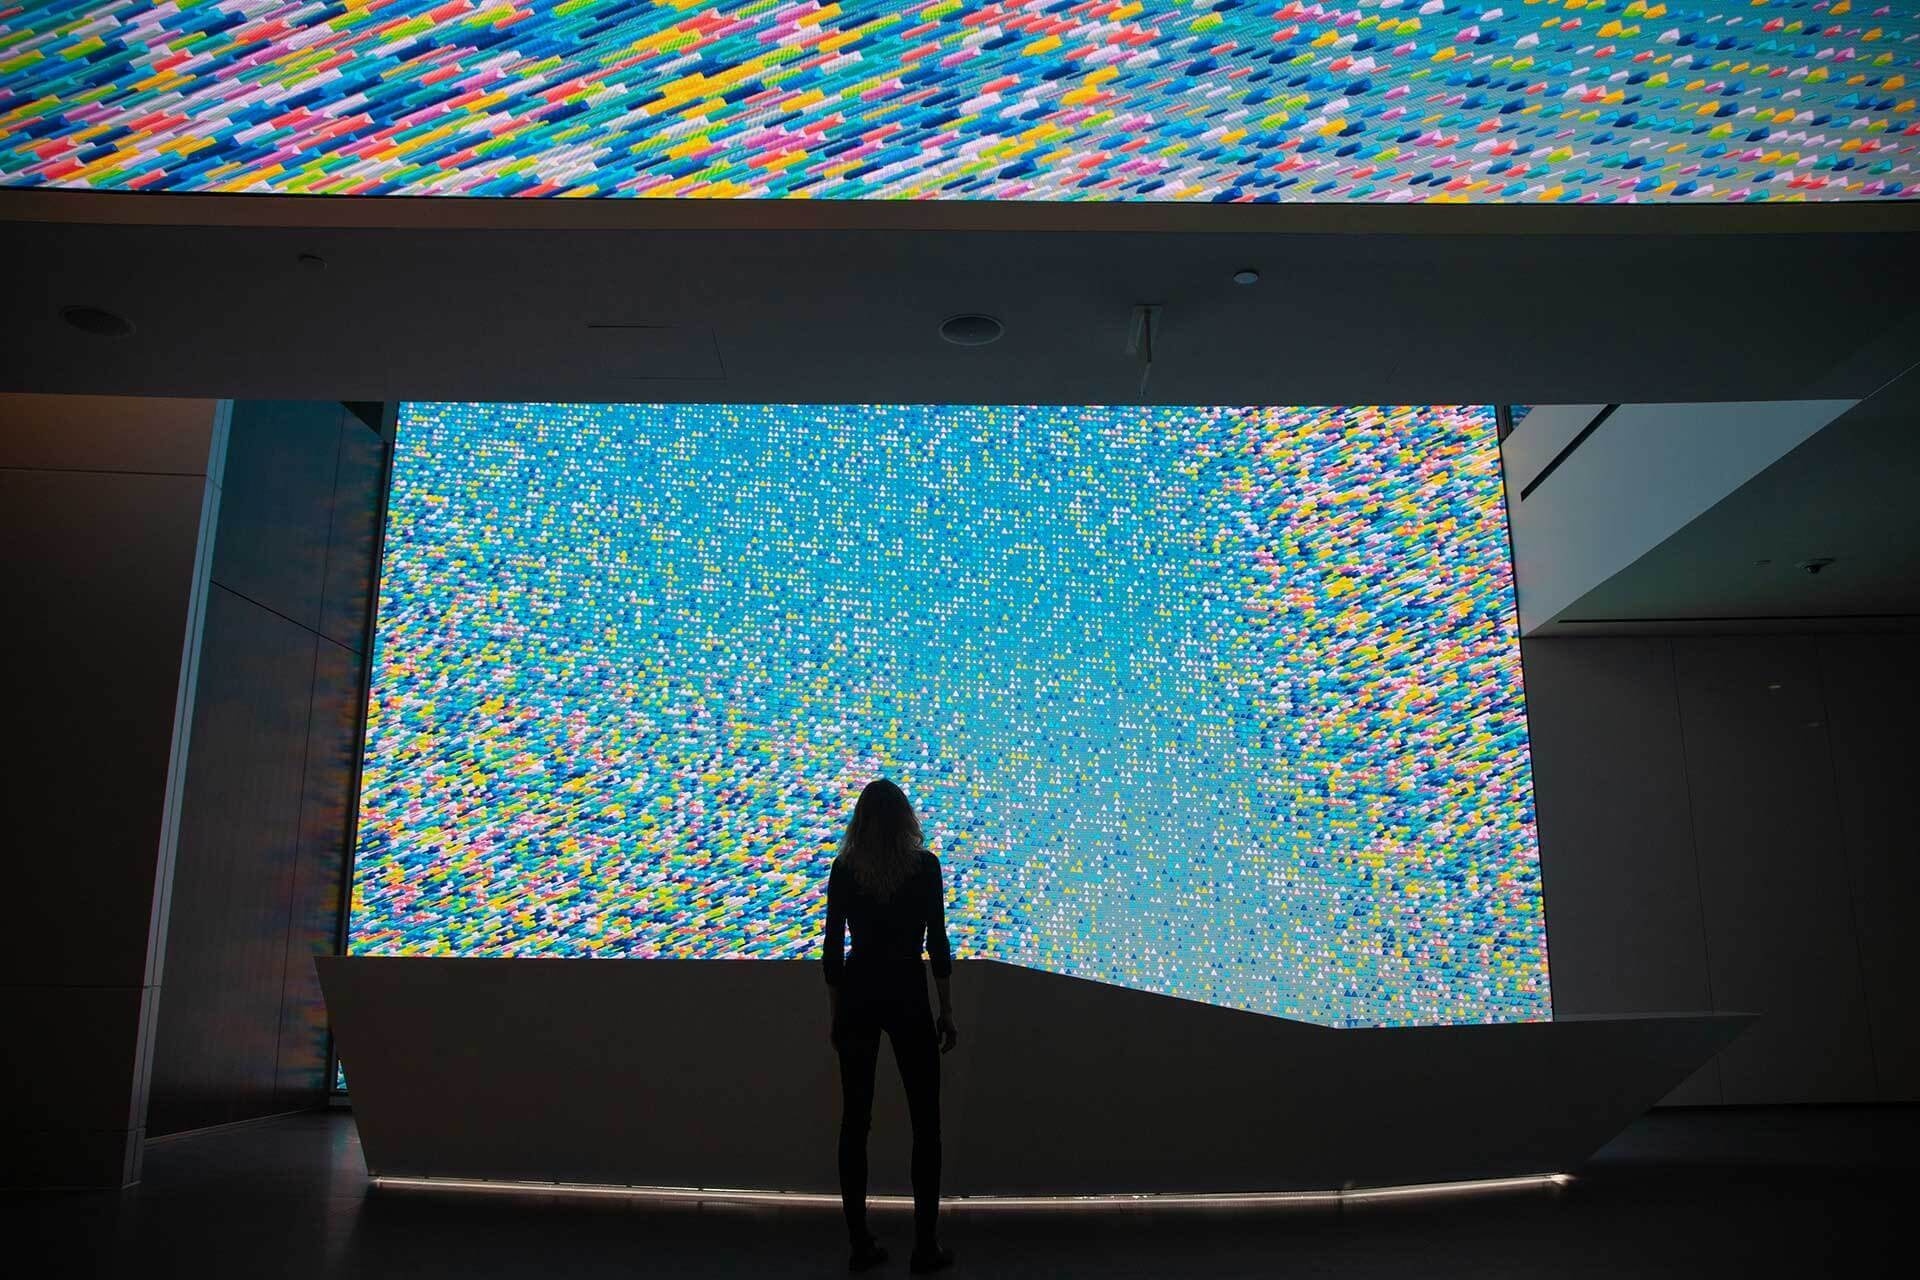 Silhouette of a woman standing in front of a large LED screen with animated graphic patterns that showcase internal and external company data insights